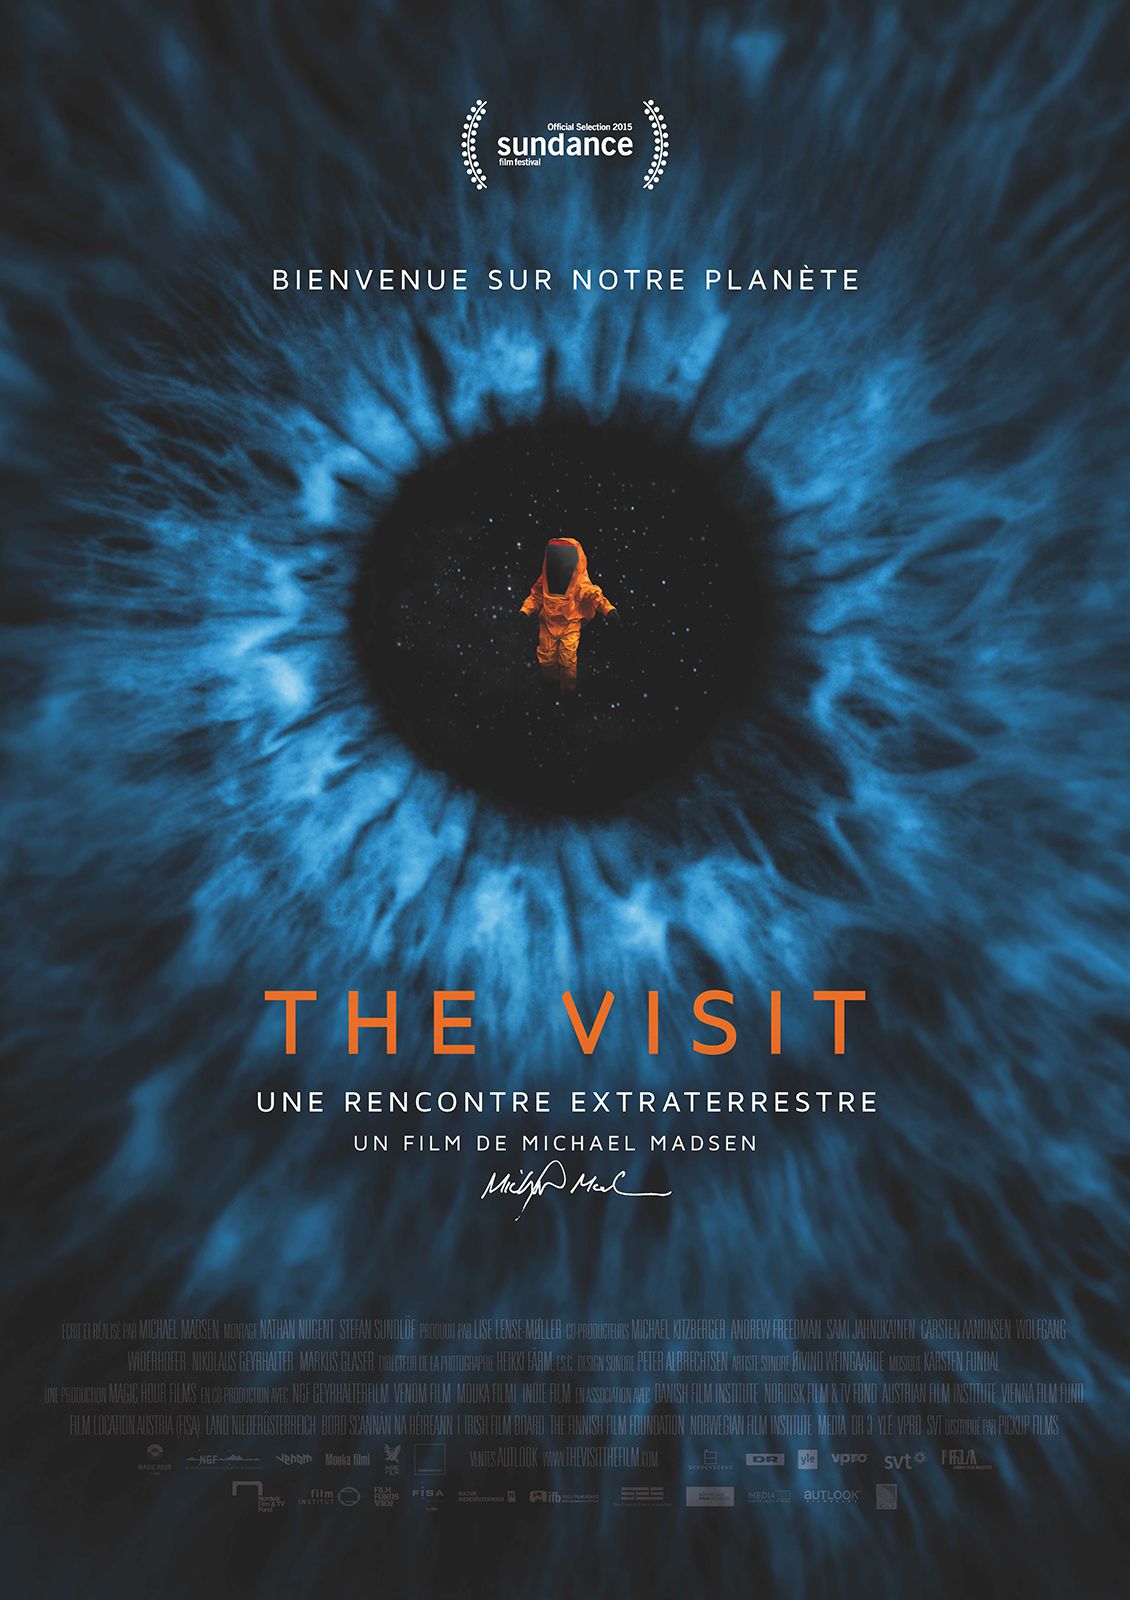 The Visit : Une rencontre extraterrestre - Documentaire (2015) streaming VF gratuit complet